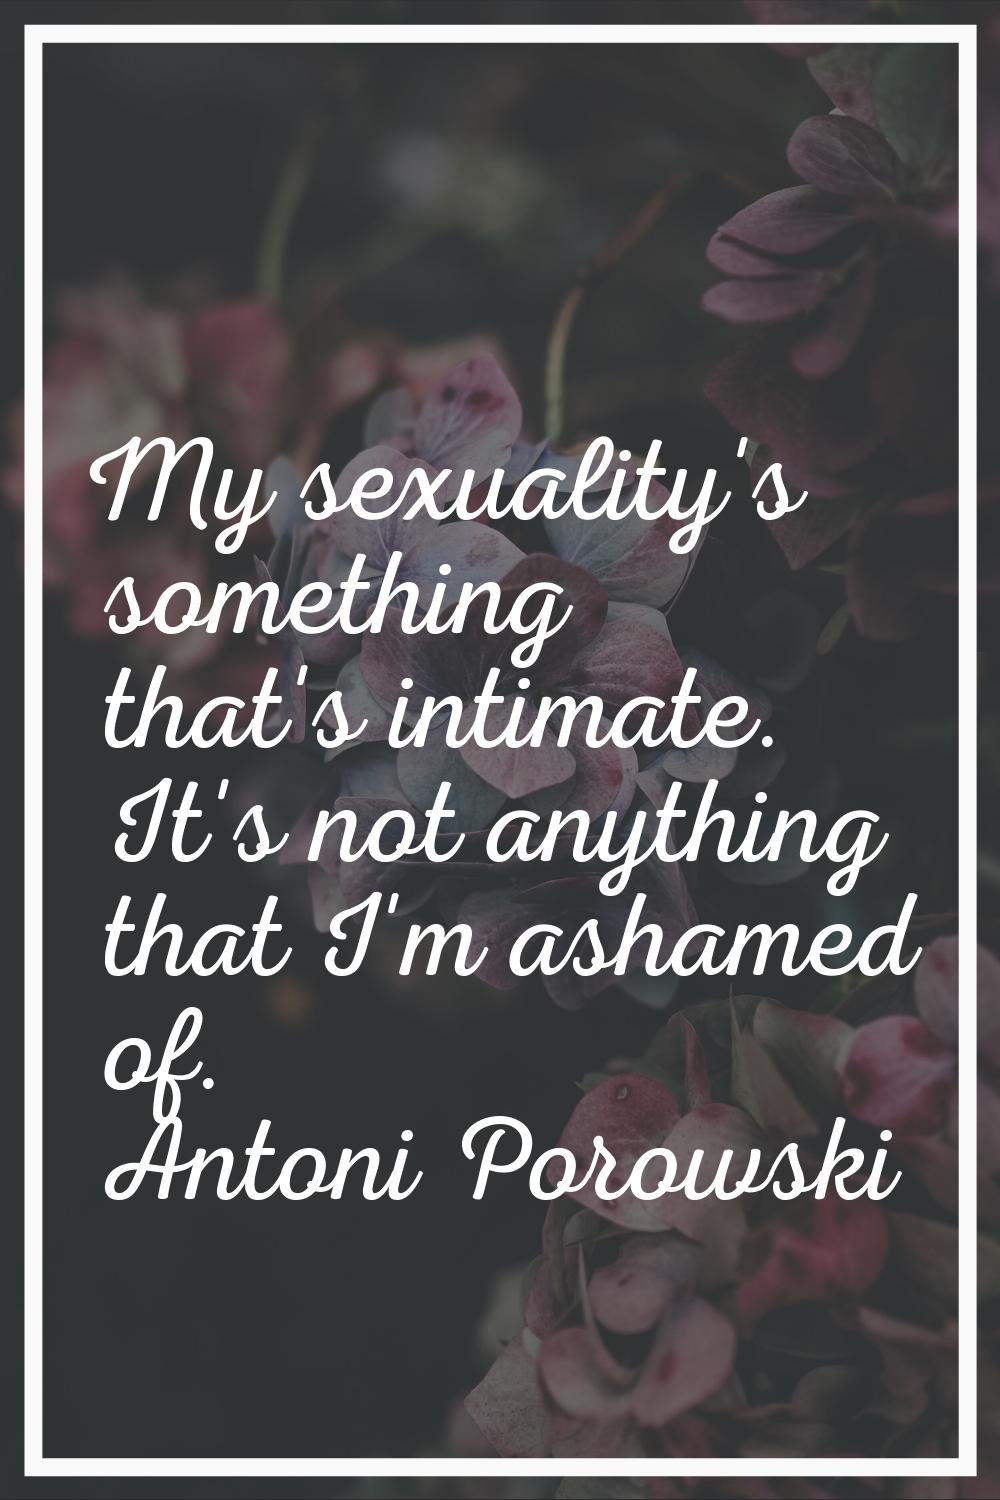 My sexuality's something that's intimate. It's not anything that I'm ashamed of.